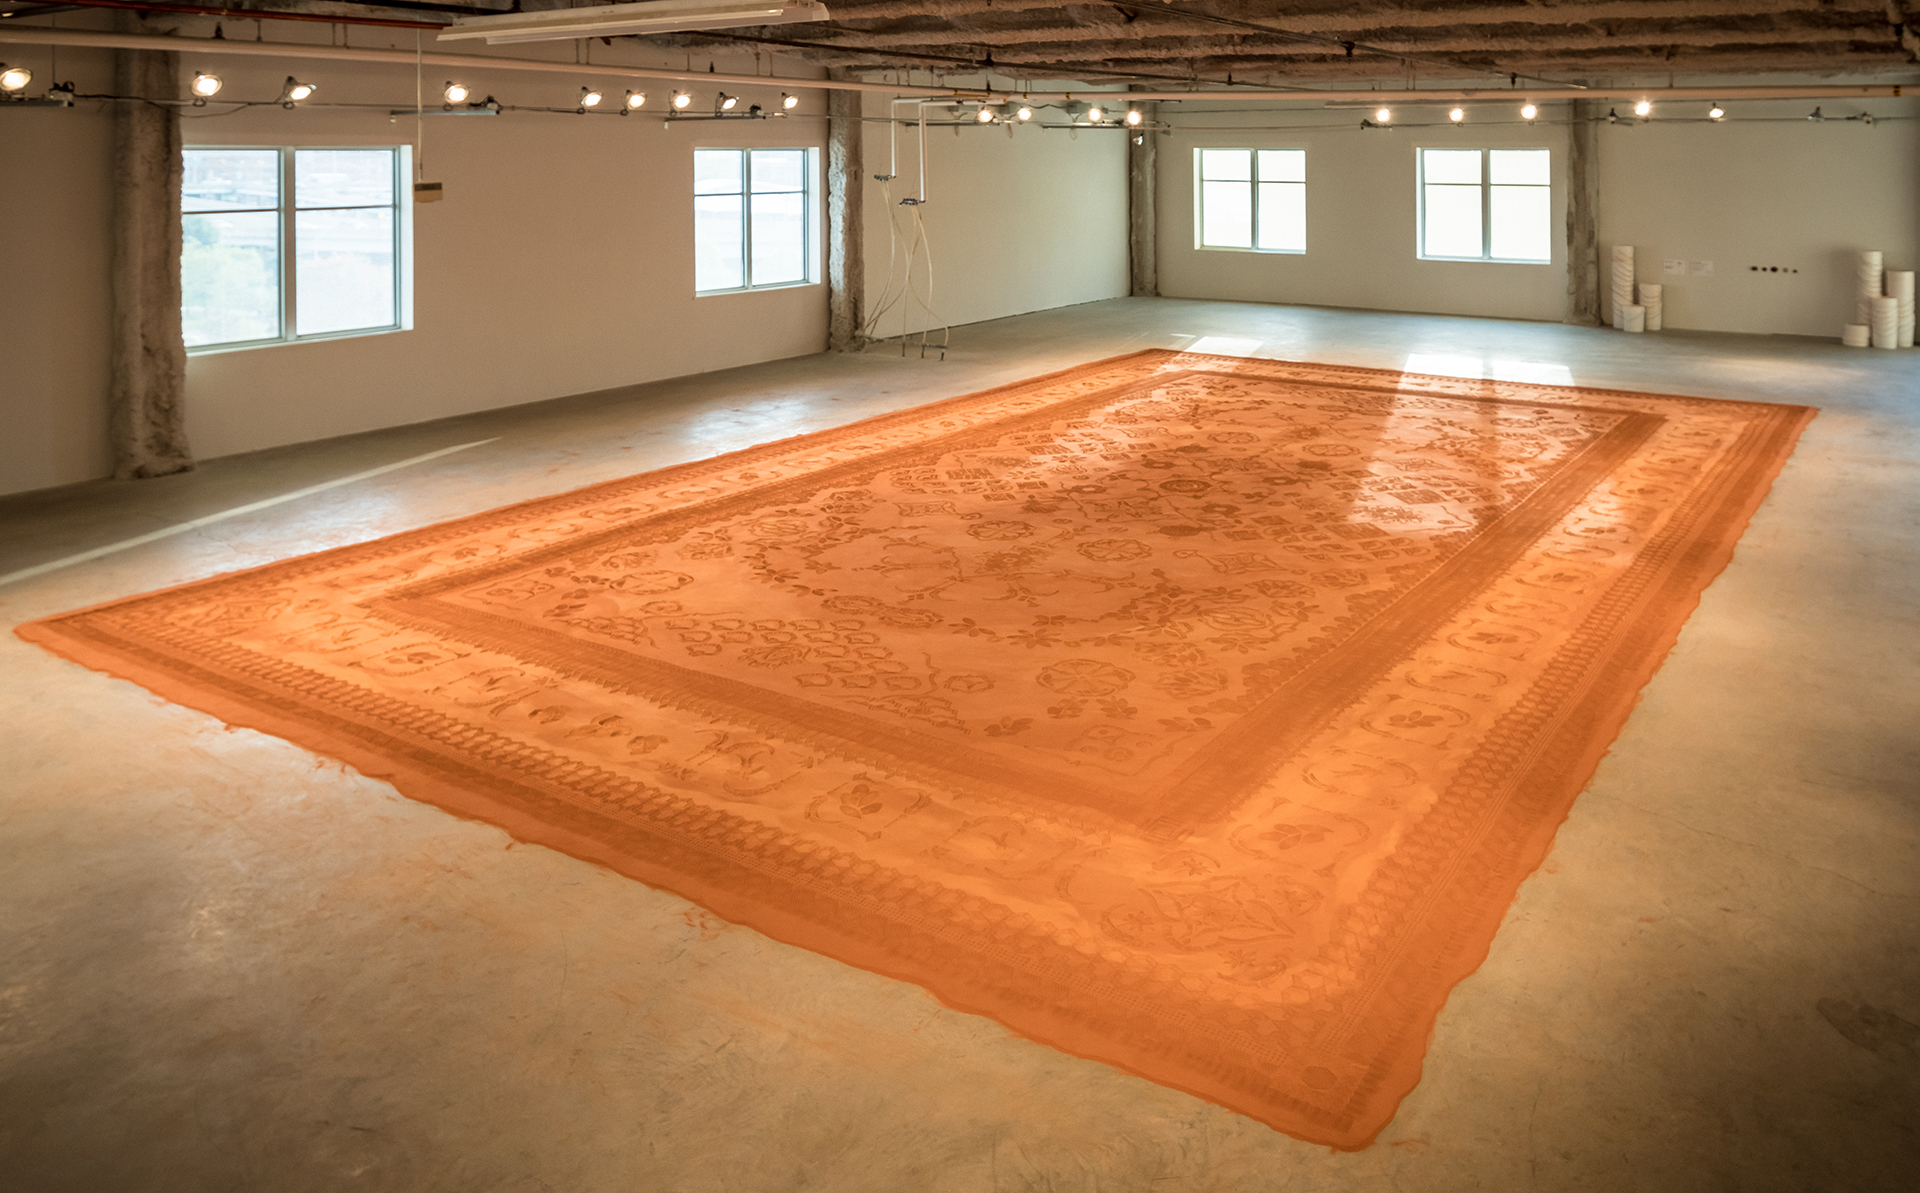 A monumental, low relief sculpture mimicking an intricate patterned rug, made with modified shoe soles imprinting ground & sifted Oklahoma red dirt